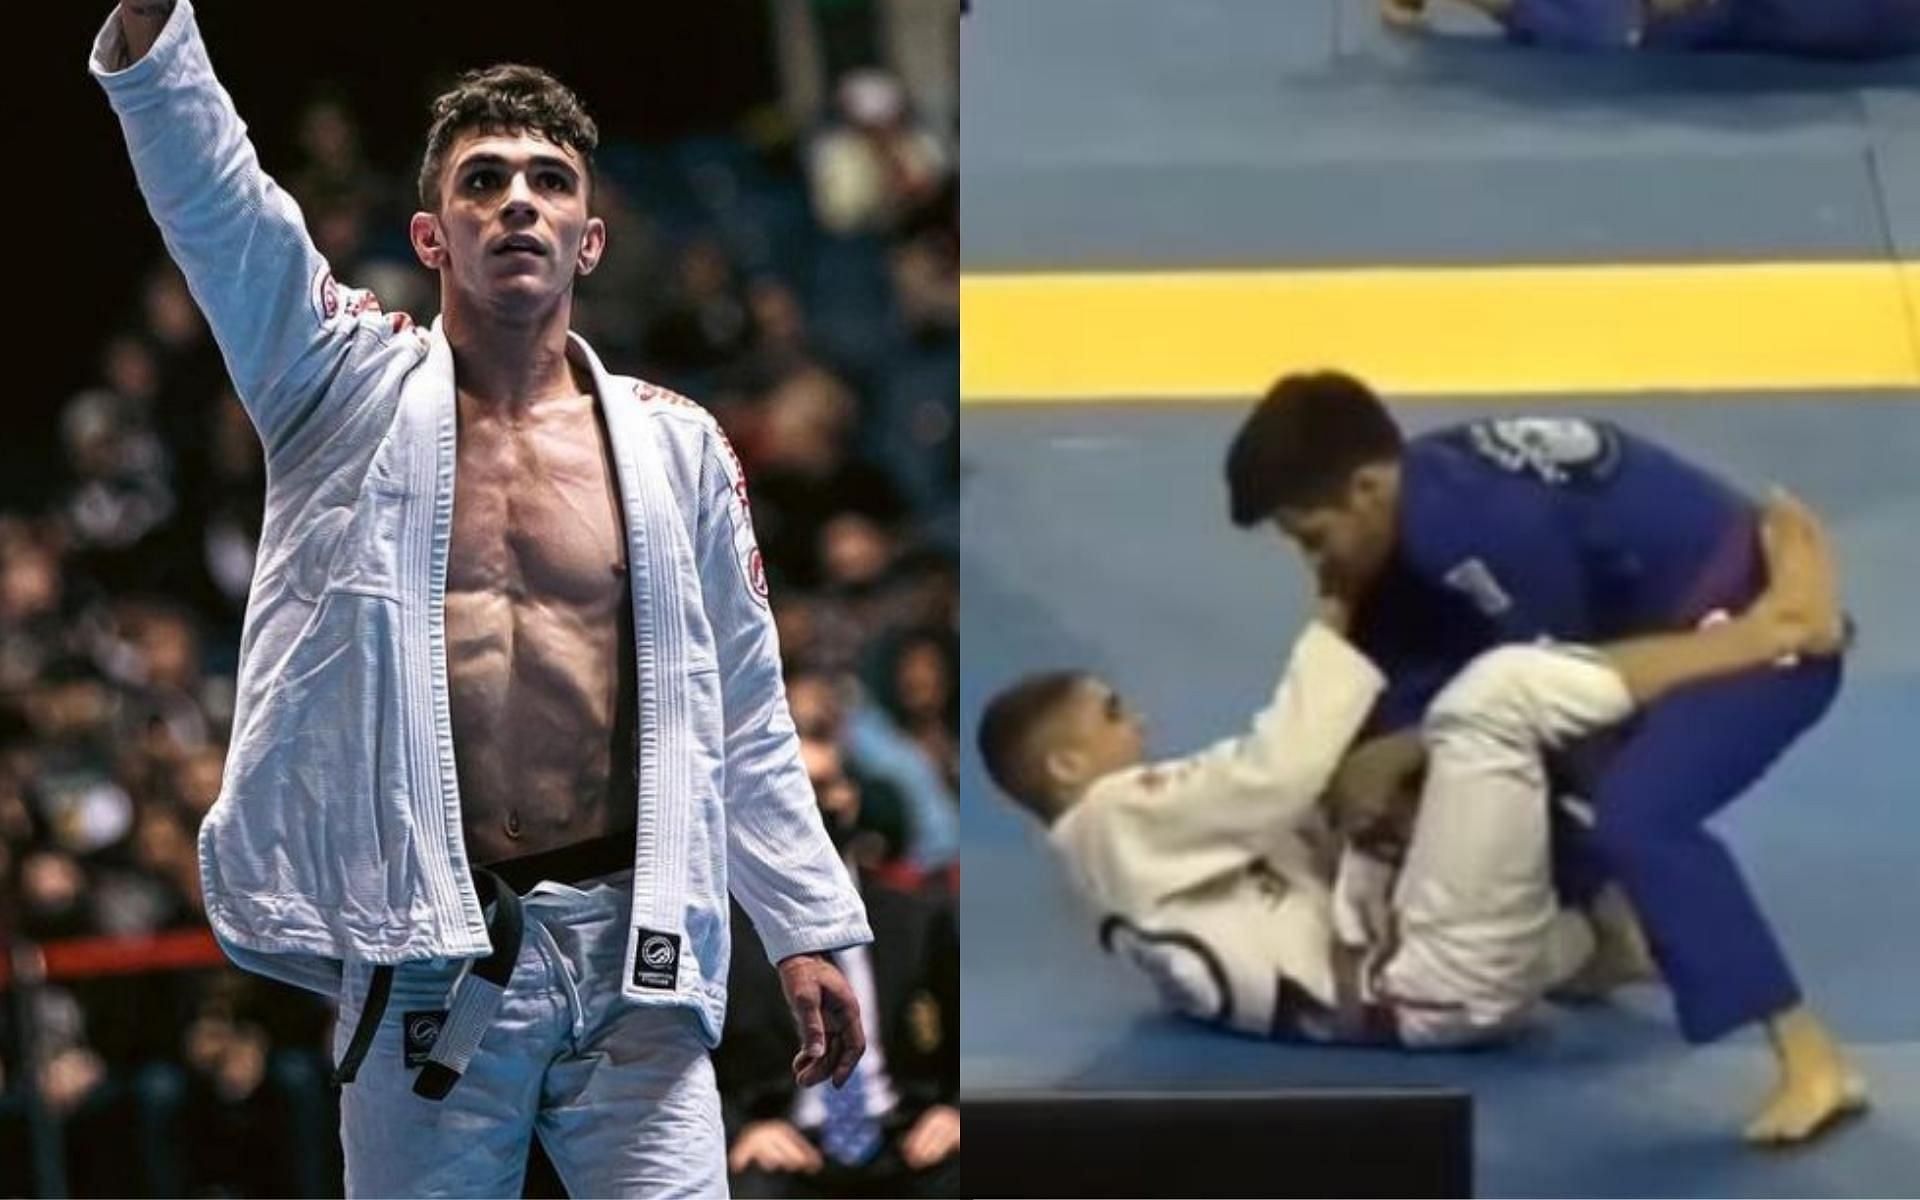 ONE Championship&#039;s grappling star Mikey Musumeci shows off his favorite Berimbolo back-take. (Images courtesy of @mikeymusumeci on Instagram)